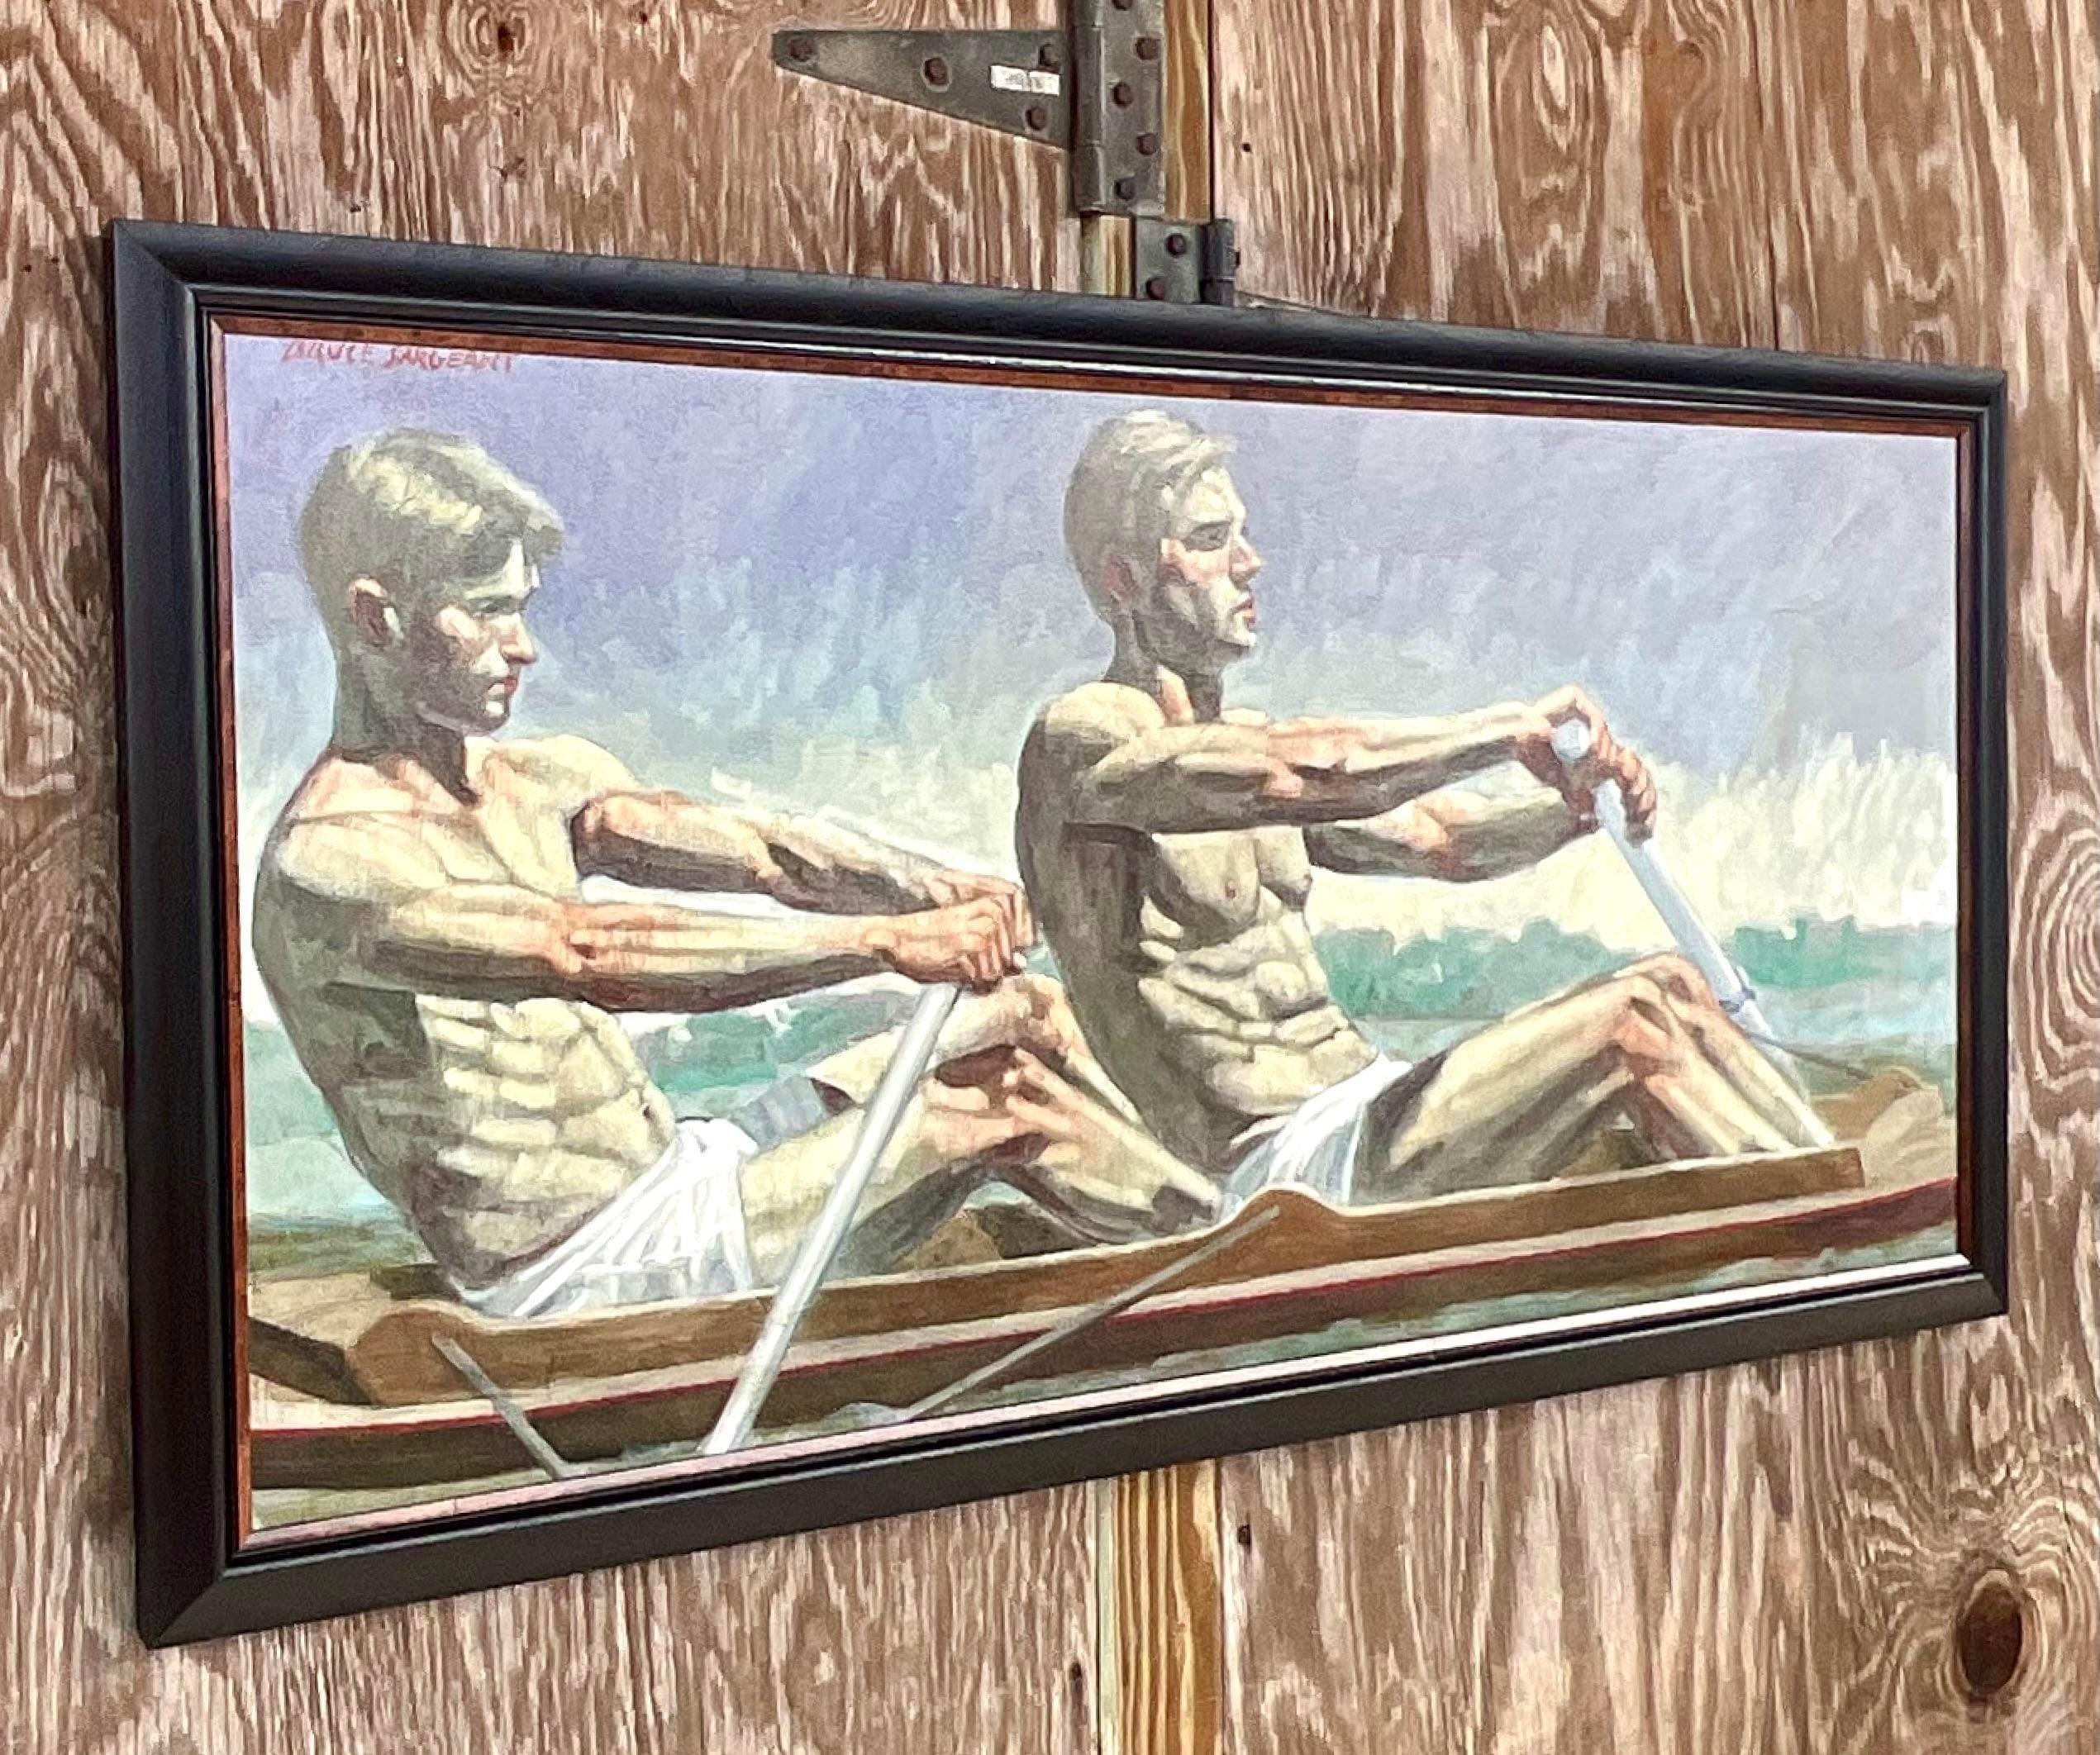 An extraordinary vintage Boho original oil painting on canvas. Done by the coveted Mark Beard under the alias Bruce Sargent. A figurative composition of two young men rowing. Acquired from a Palm Beach collector.